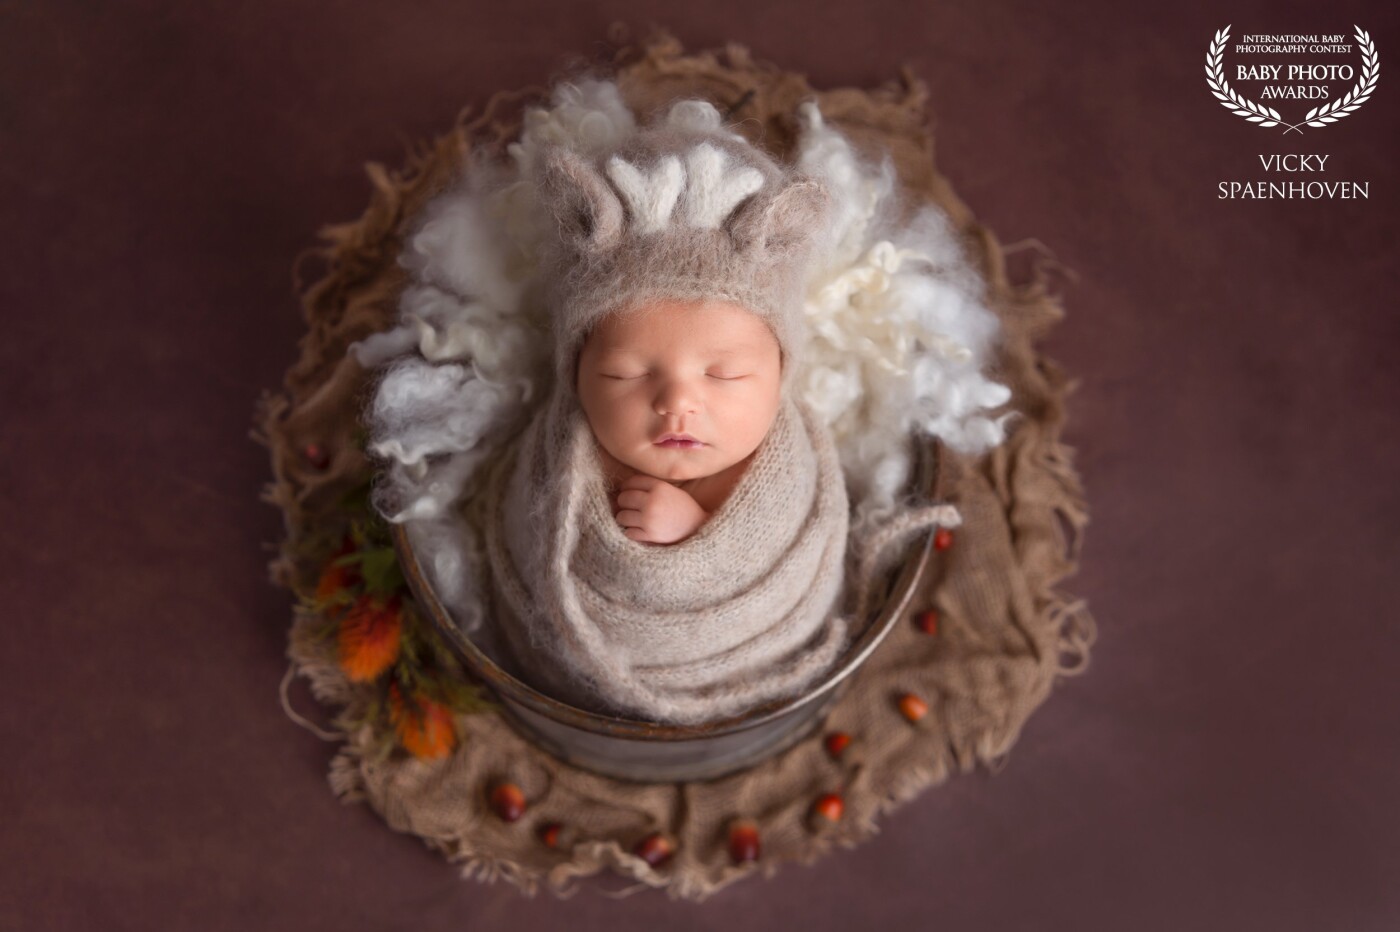 Beautiful babyboy Collin, 6 days old. I’d wanted to create a warm autumn portrait with beautiful earth tones. So glad it turned out well. Thank you so much for the award! I feel very honored ???